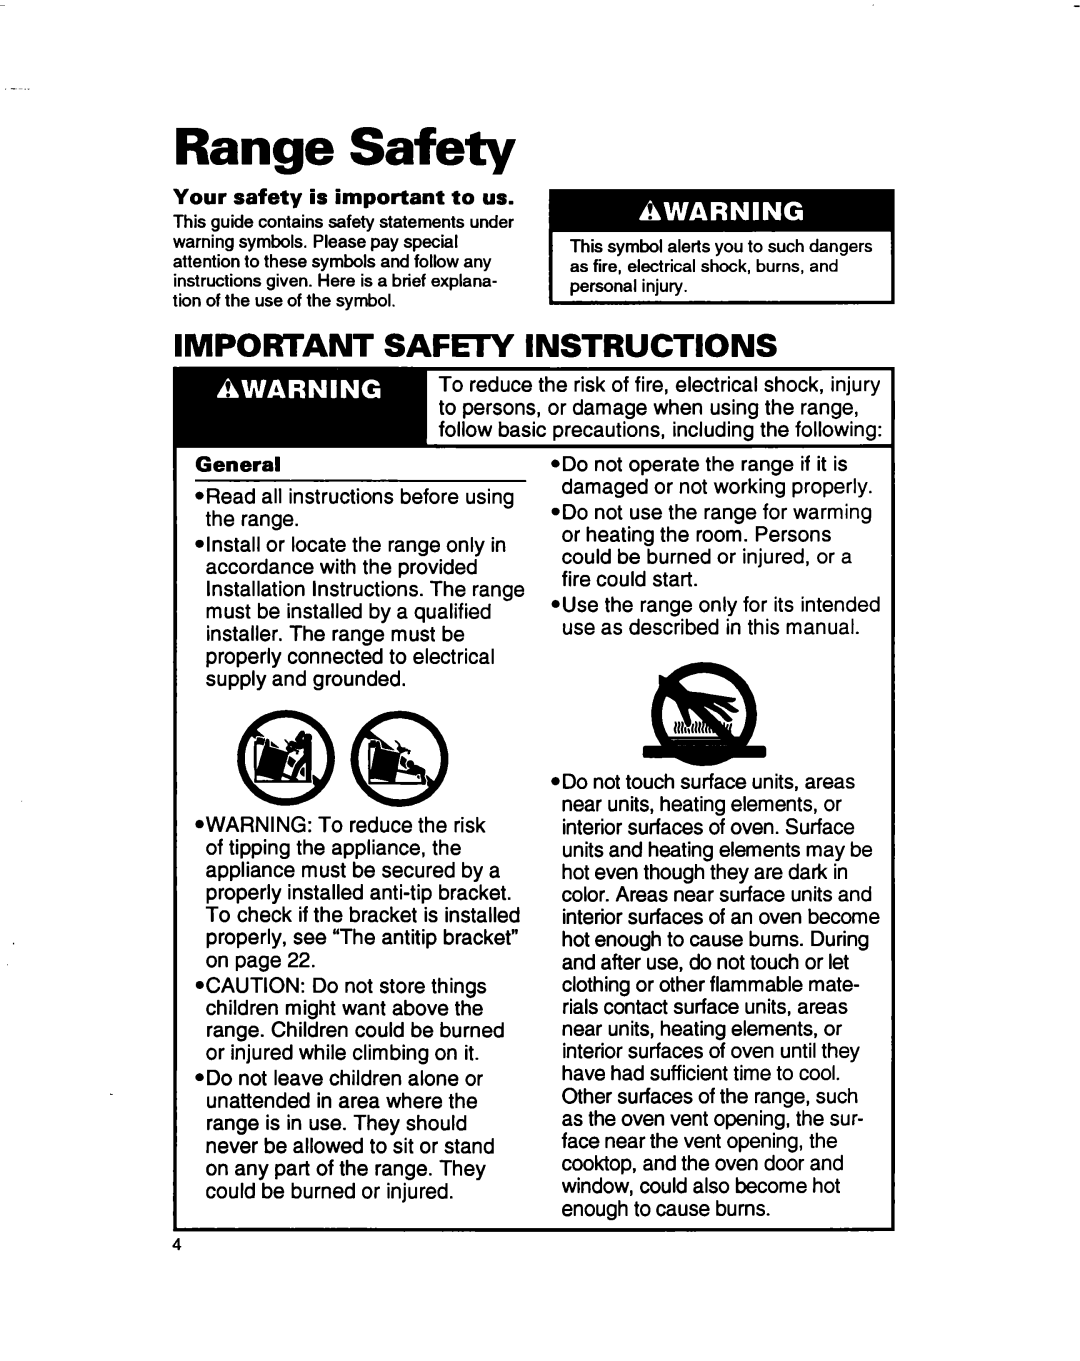 Whirlpool RF370PXD, RF375PXD, RF362BBD manual Range Safety, Important Safh-Yinstructions 